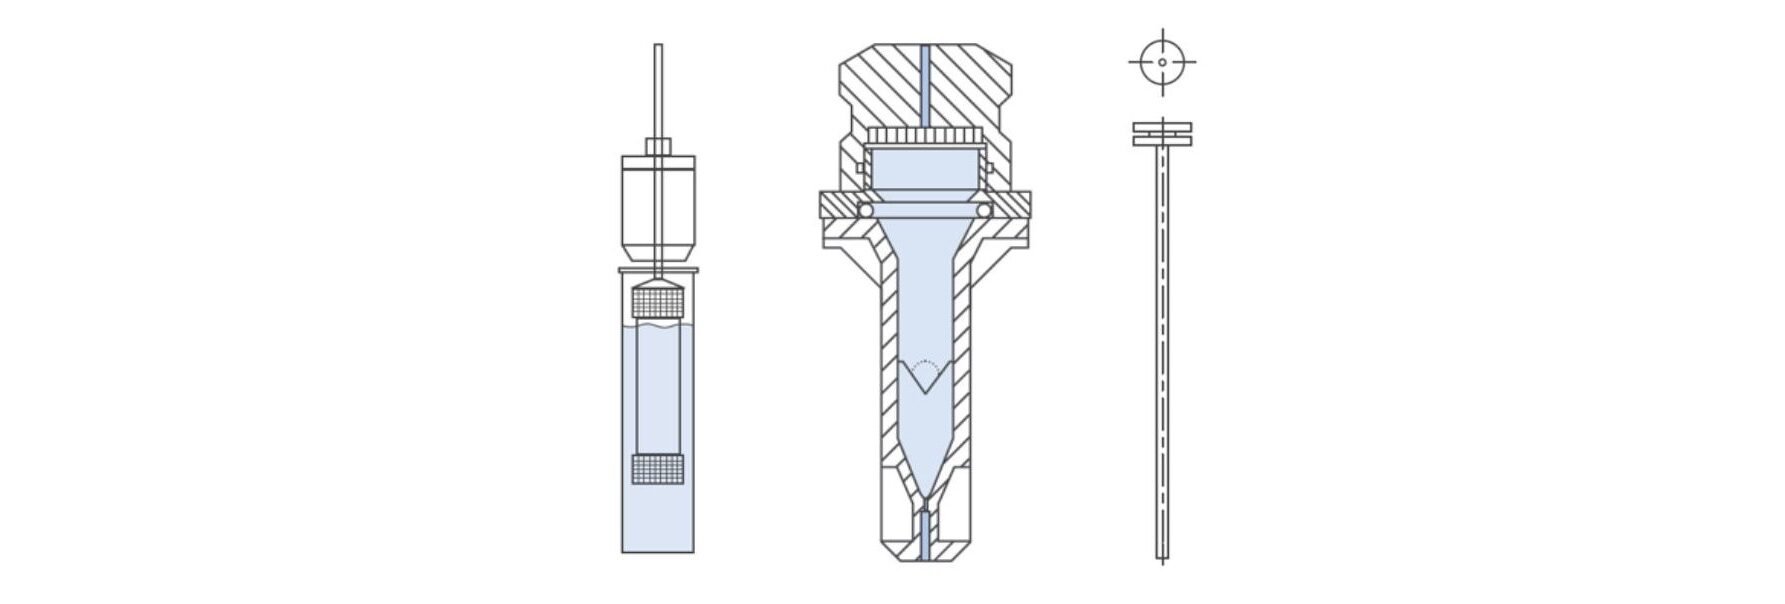 Left to right - Apparatus 3: Reciprocating Cylinder Apparatus, 4: Flow-Through Cell Apparatus, 7: Reciprocating Holder